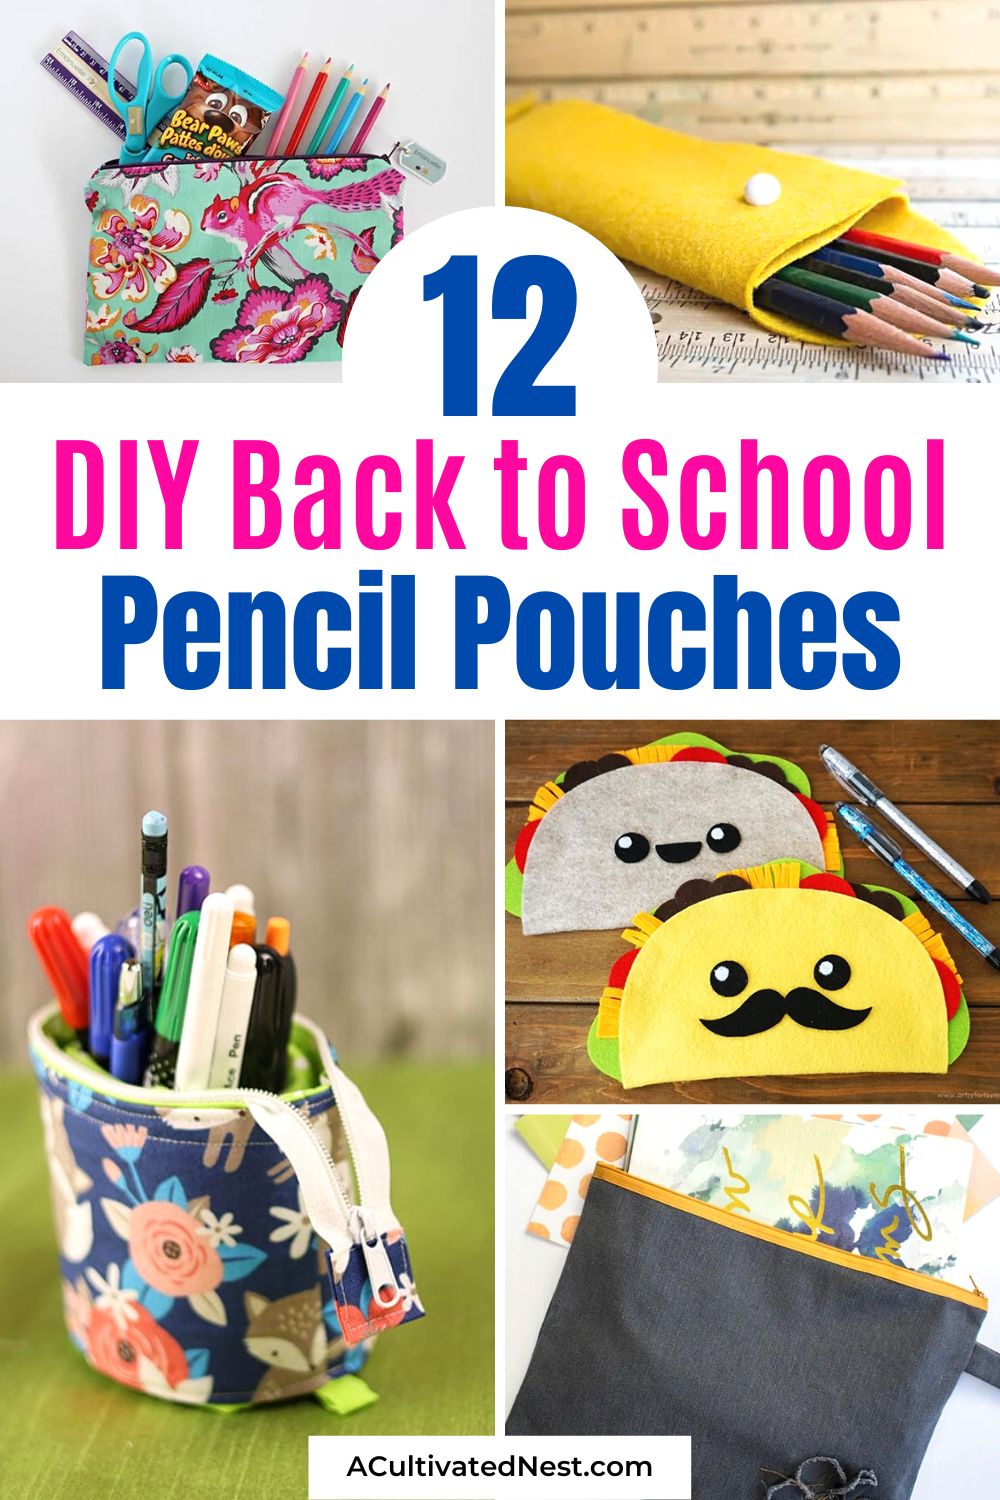 12 Fun Back-to-School Pencil Case DIYs- Unleash your inner crafter with these amazing DIY pencil case ideas! Whether you prefer sleek and minimalistic or colorful and playful, these projects are perfect for adding a personal touch to your school supplies! | #DIYBackToSchool #PencilCases #sewing #sewingProjects #ACultivatedNest